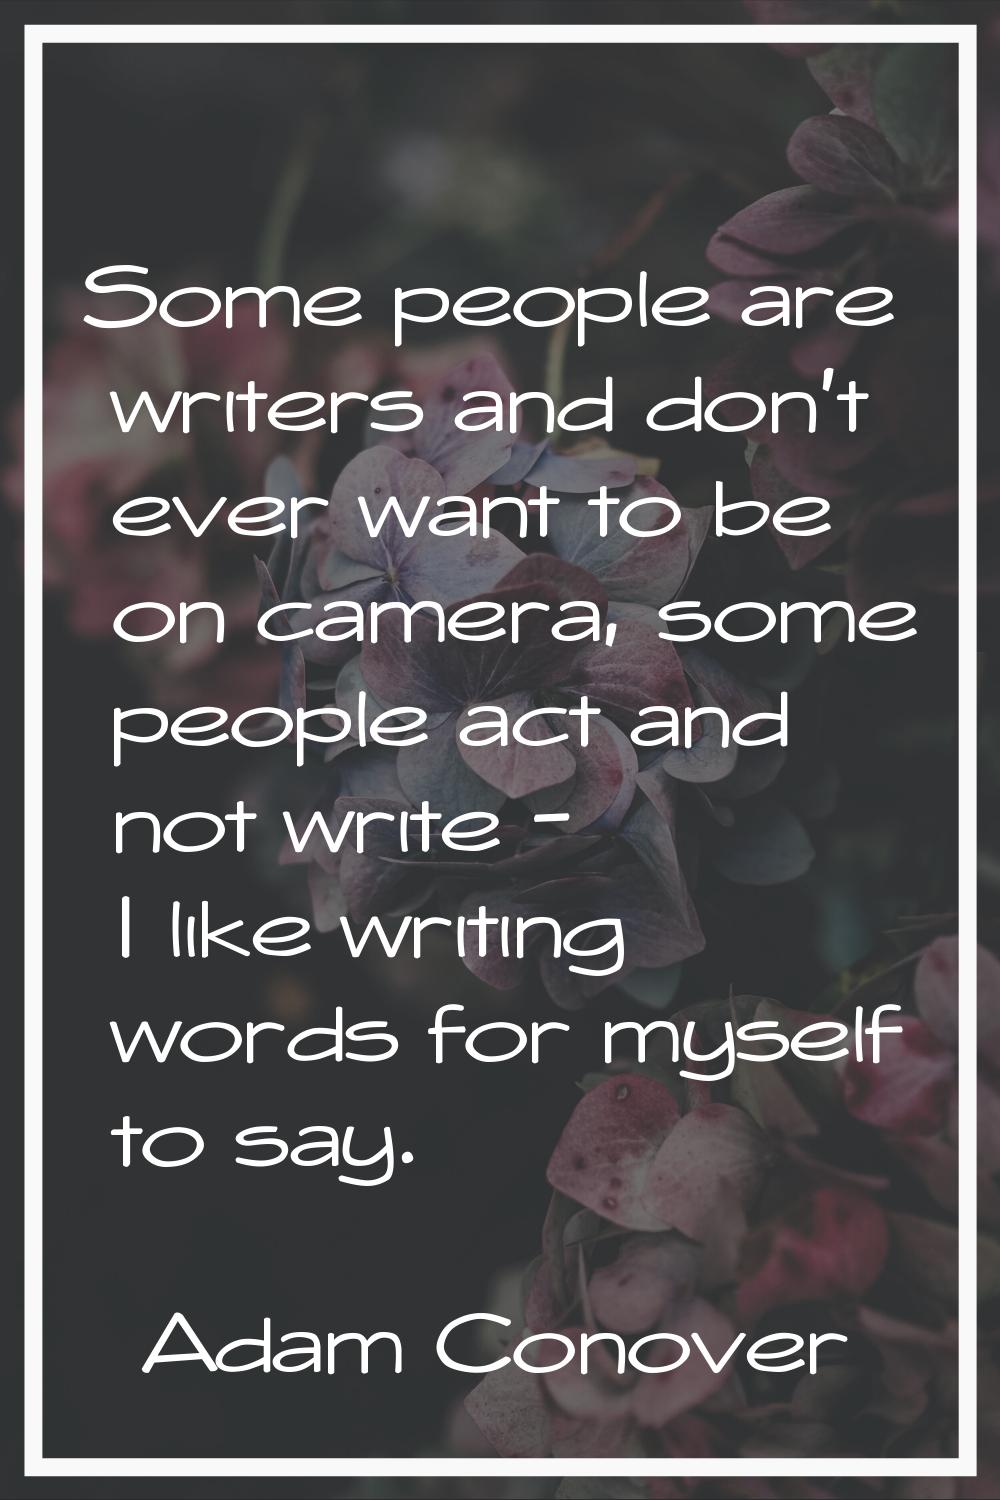 Some people are writers and don't ever want to be on camera, some people act and not write - I like